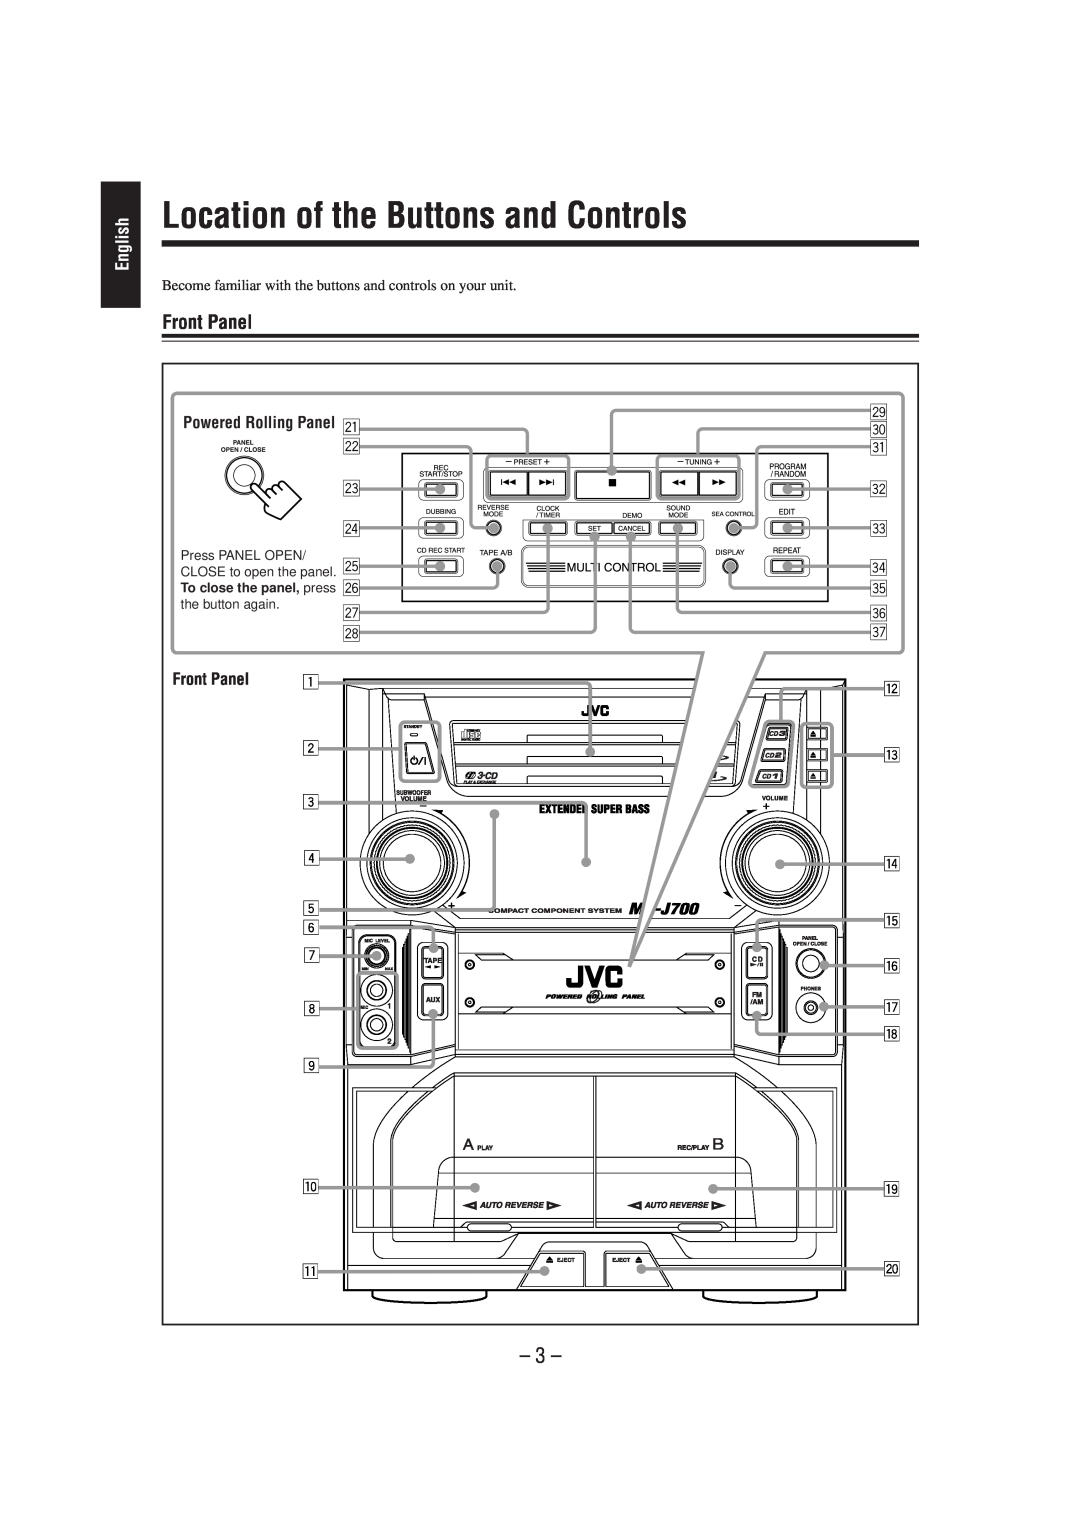 JVC CA-MXJ700, GVT0030-003A manual Location of the Buttons and Controls, Front Panel, English 